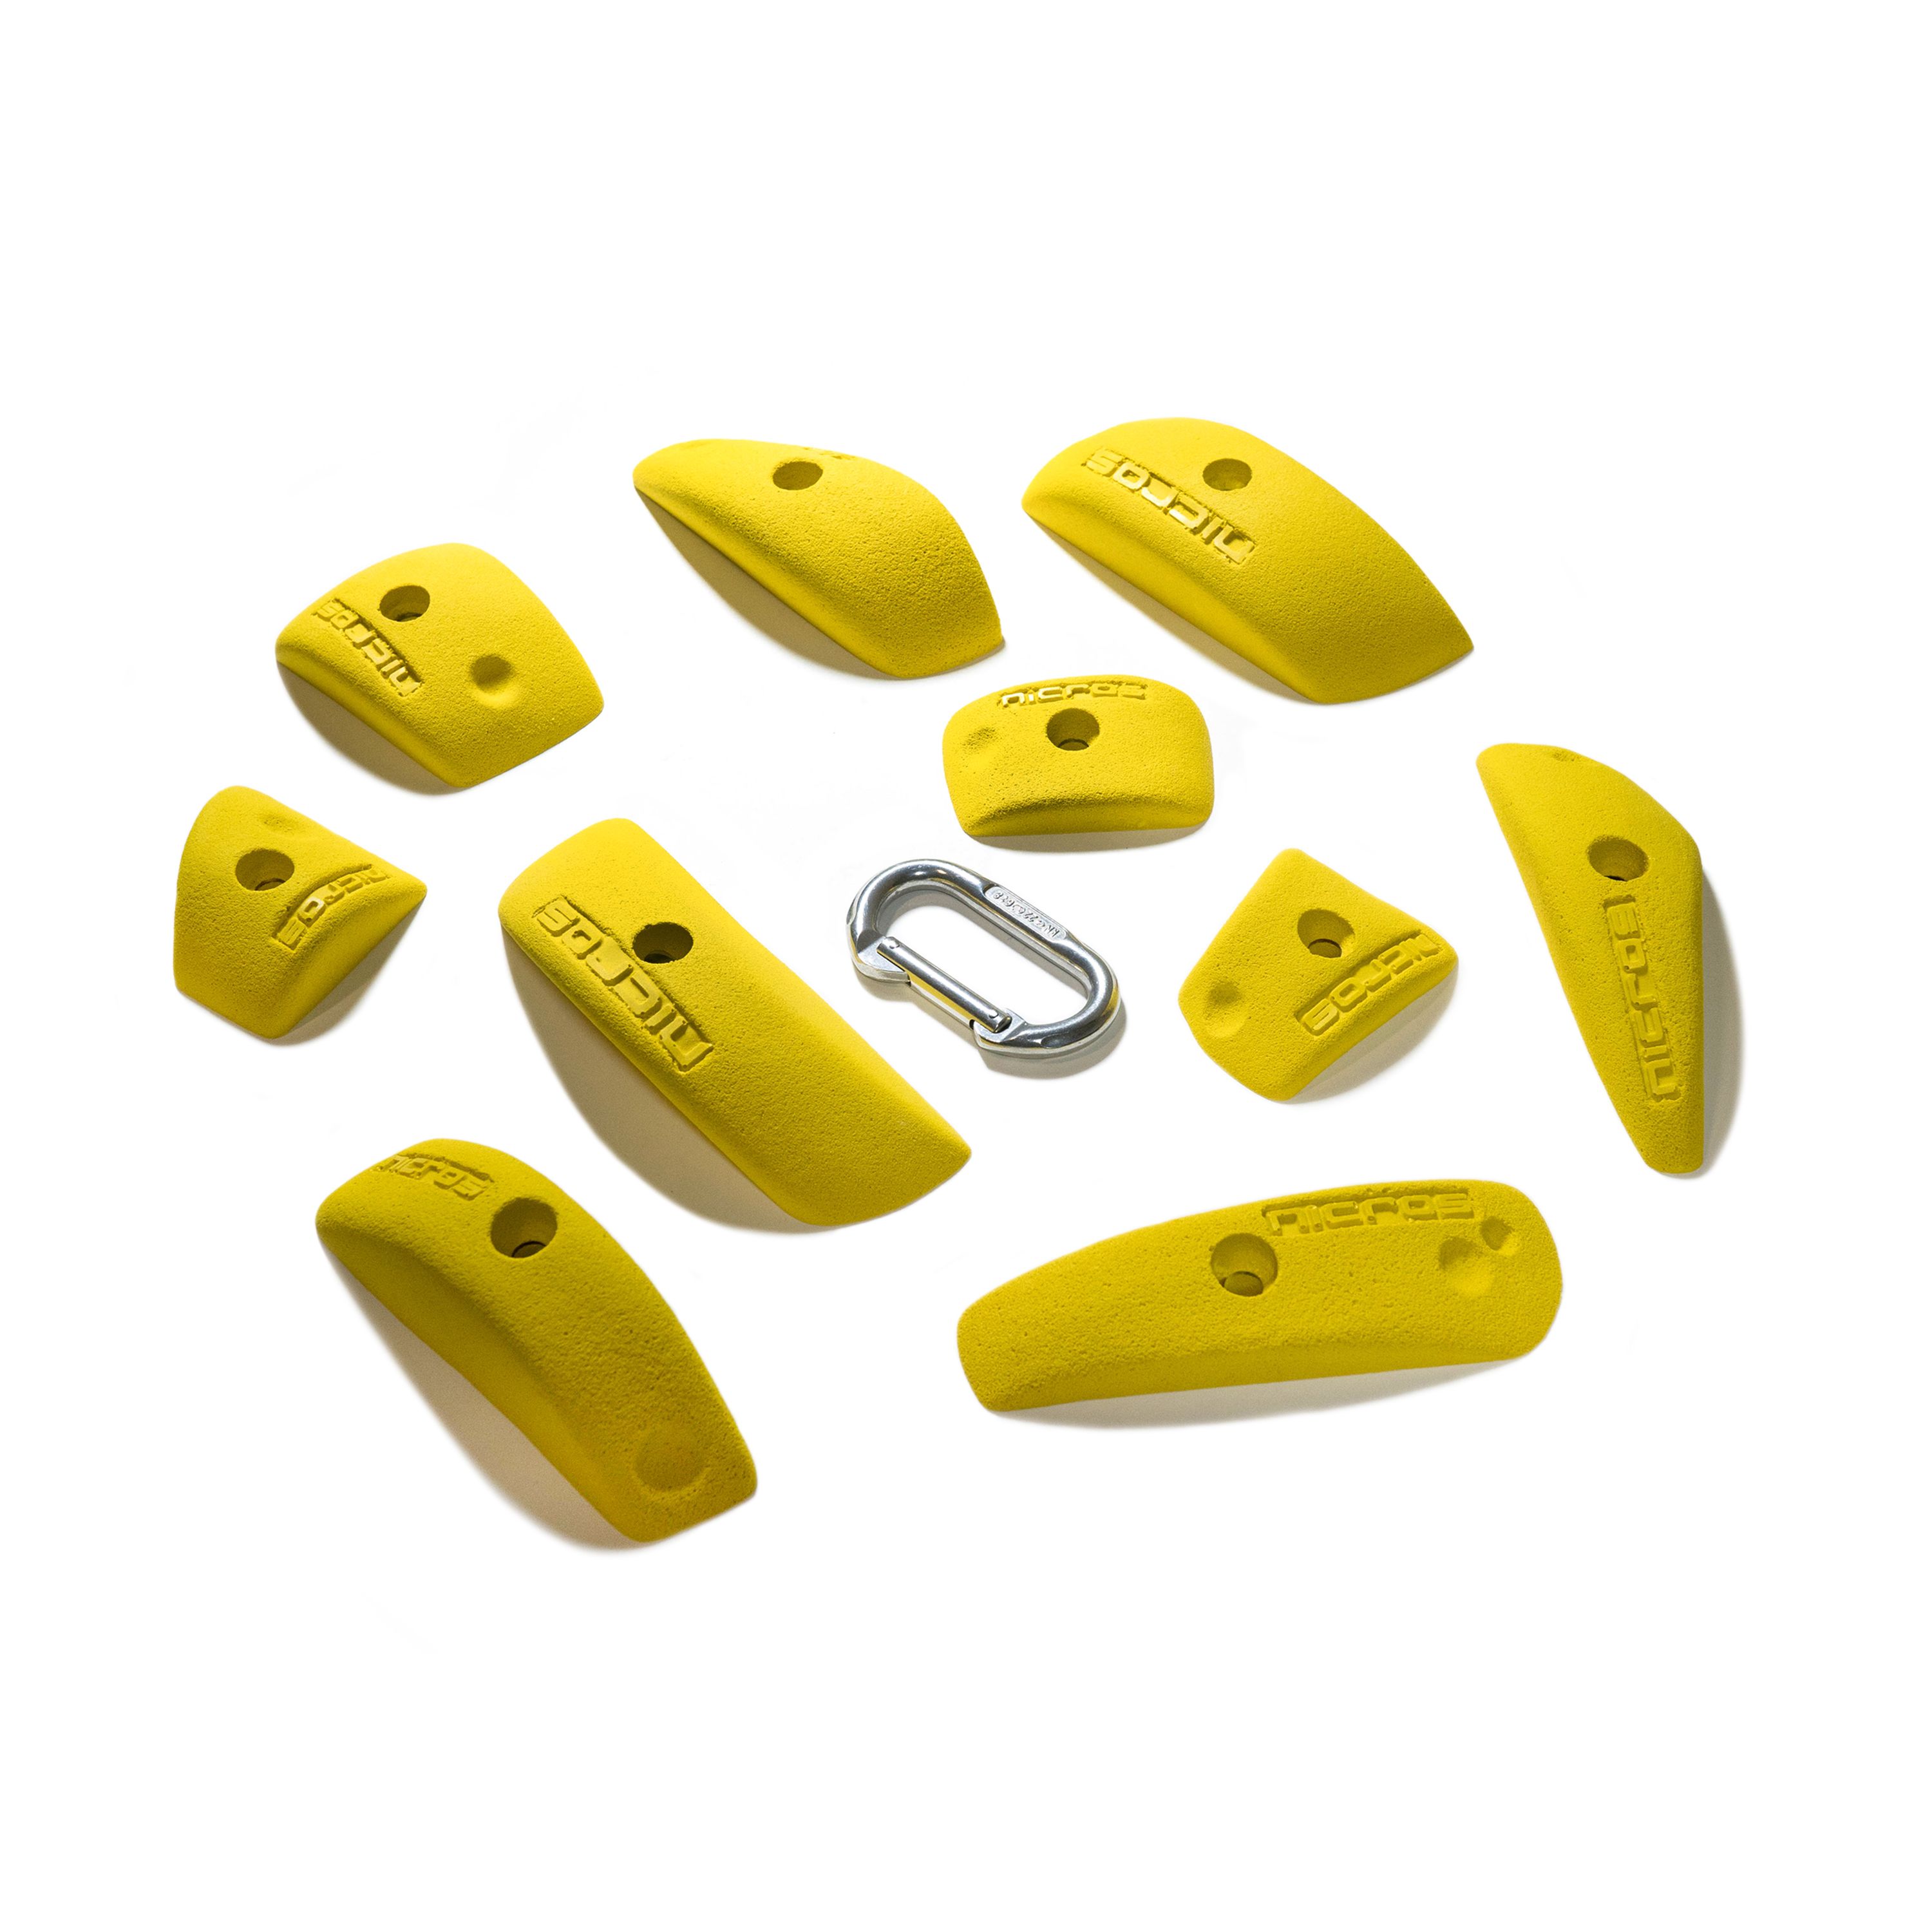 Picture of Nicros HHPD Pinches Building Blox Handholds - Yellow